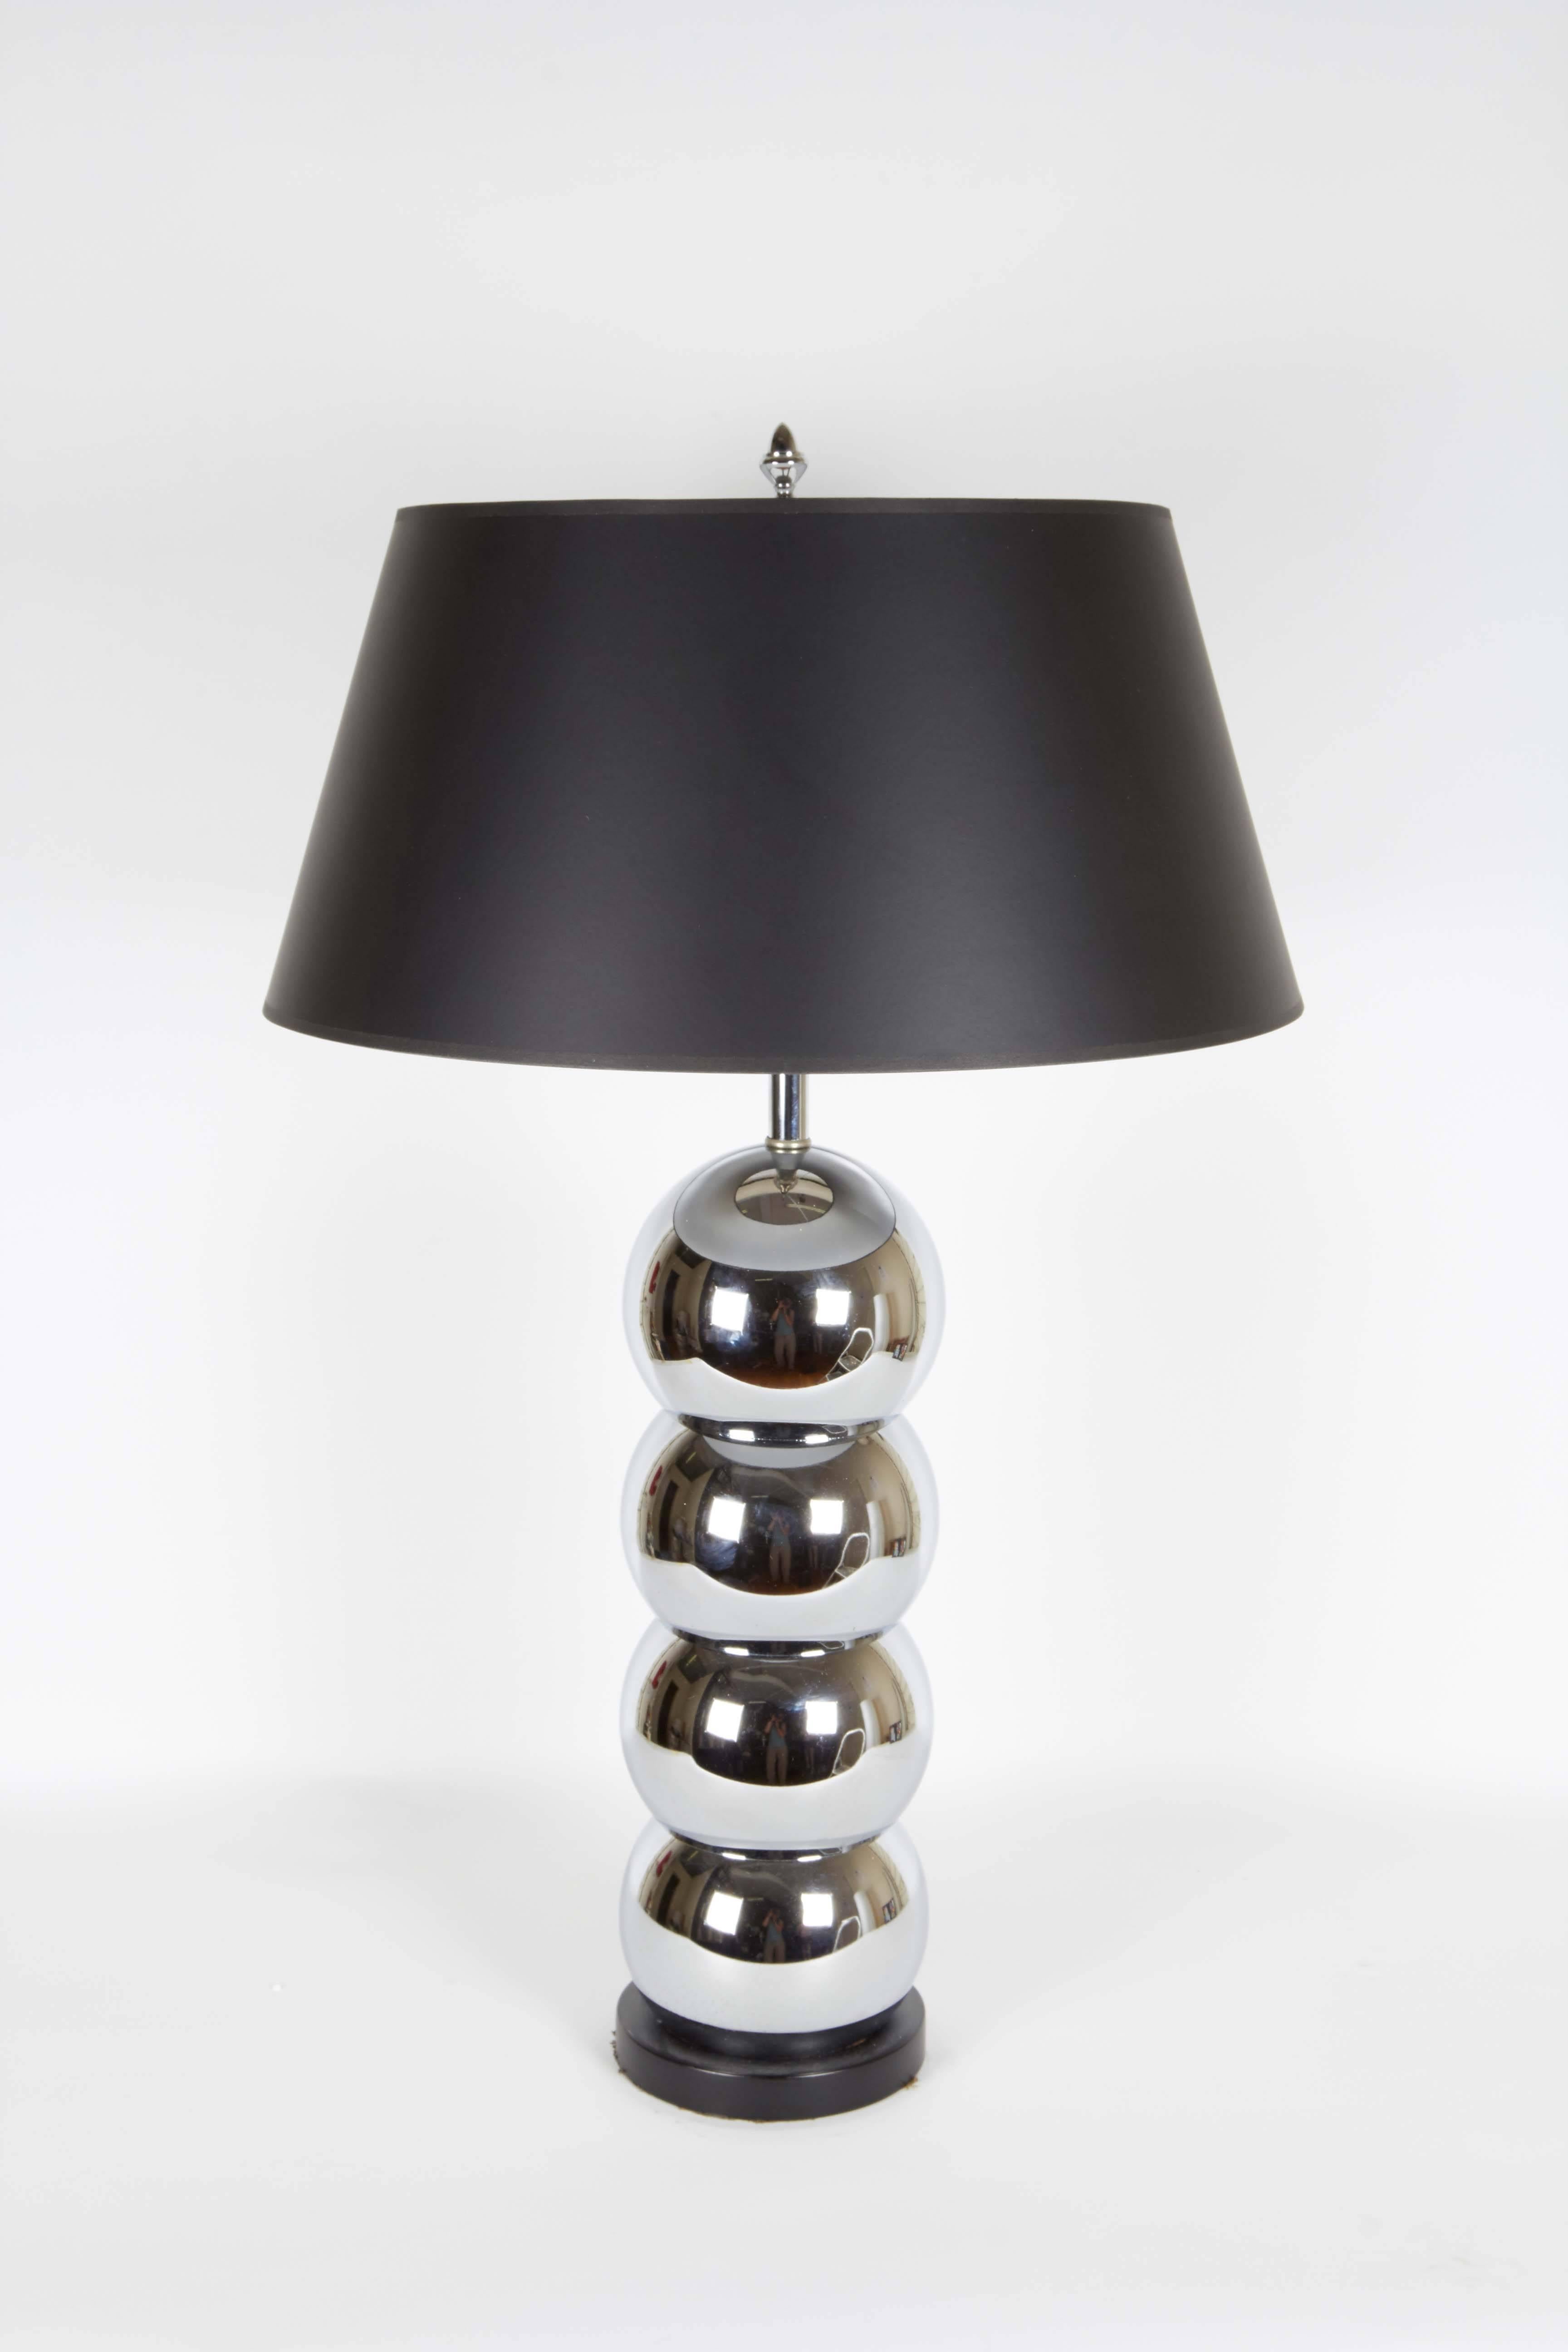 A pair of modernist table lamps by George Kovacs, manufactured in the United States, circa 1960s, with single socket and stem above bodies comprised of mercury glass, formed into four stacked balls, mounted on metal bases in black enamel. Wiring and